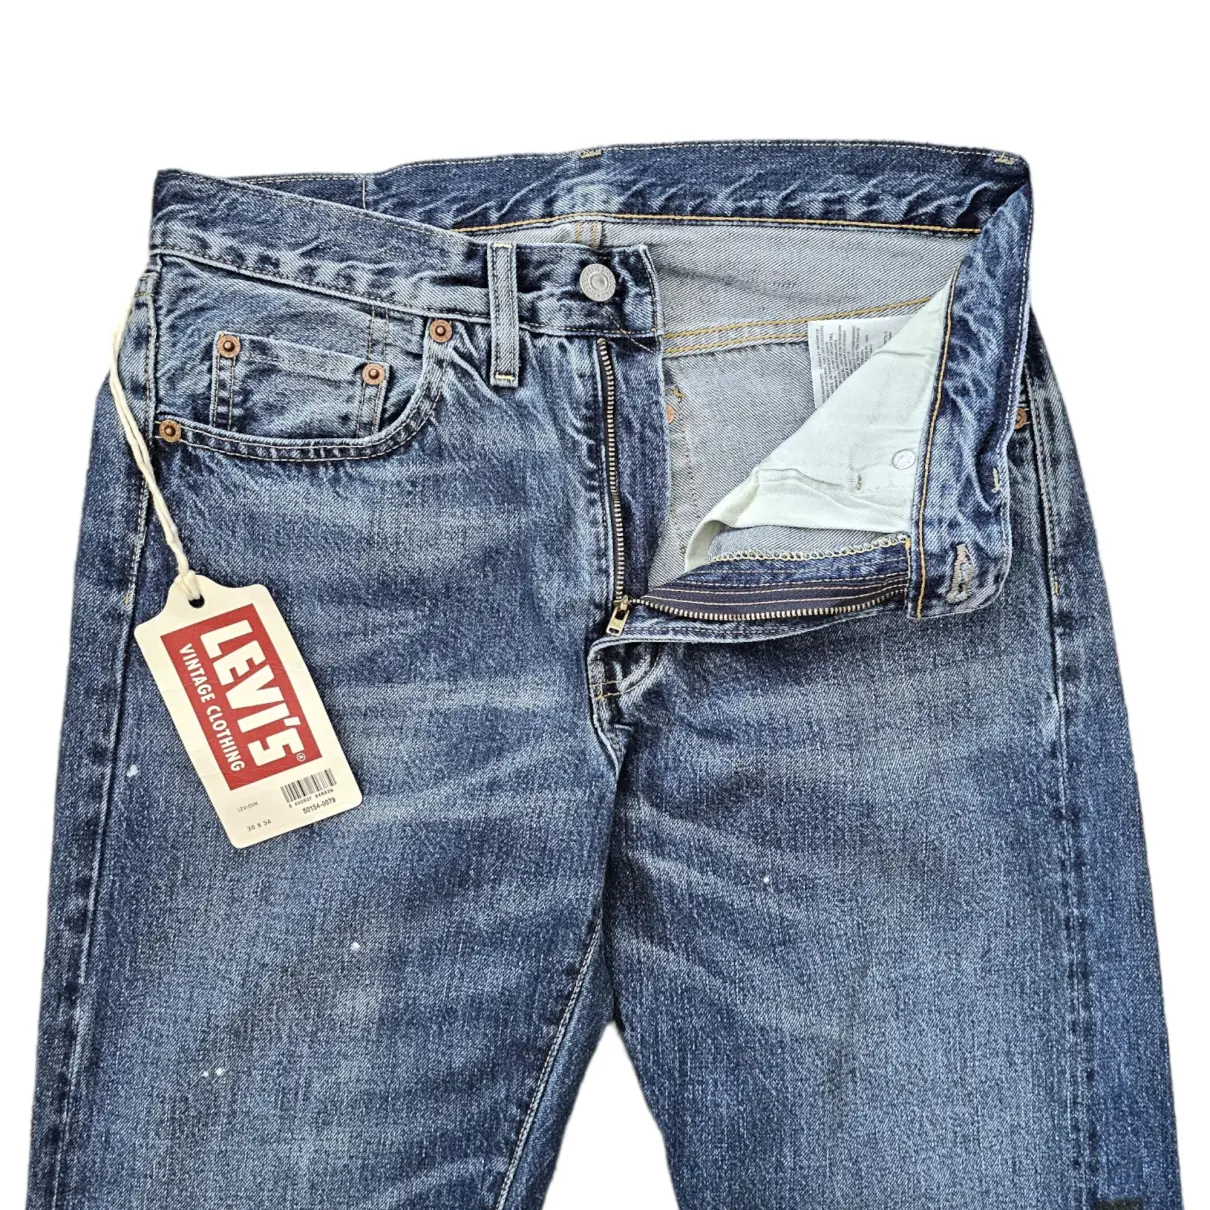 Buy Levi's Vintage Clothing Straight jeans online